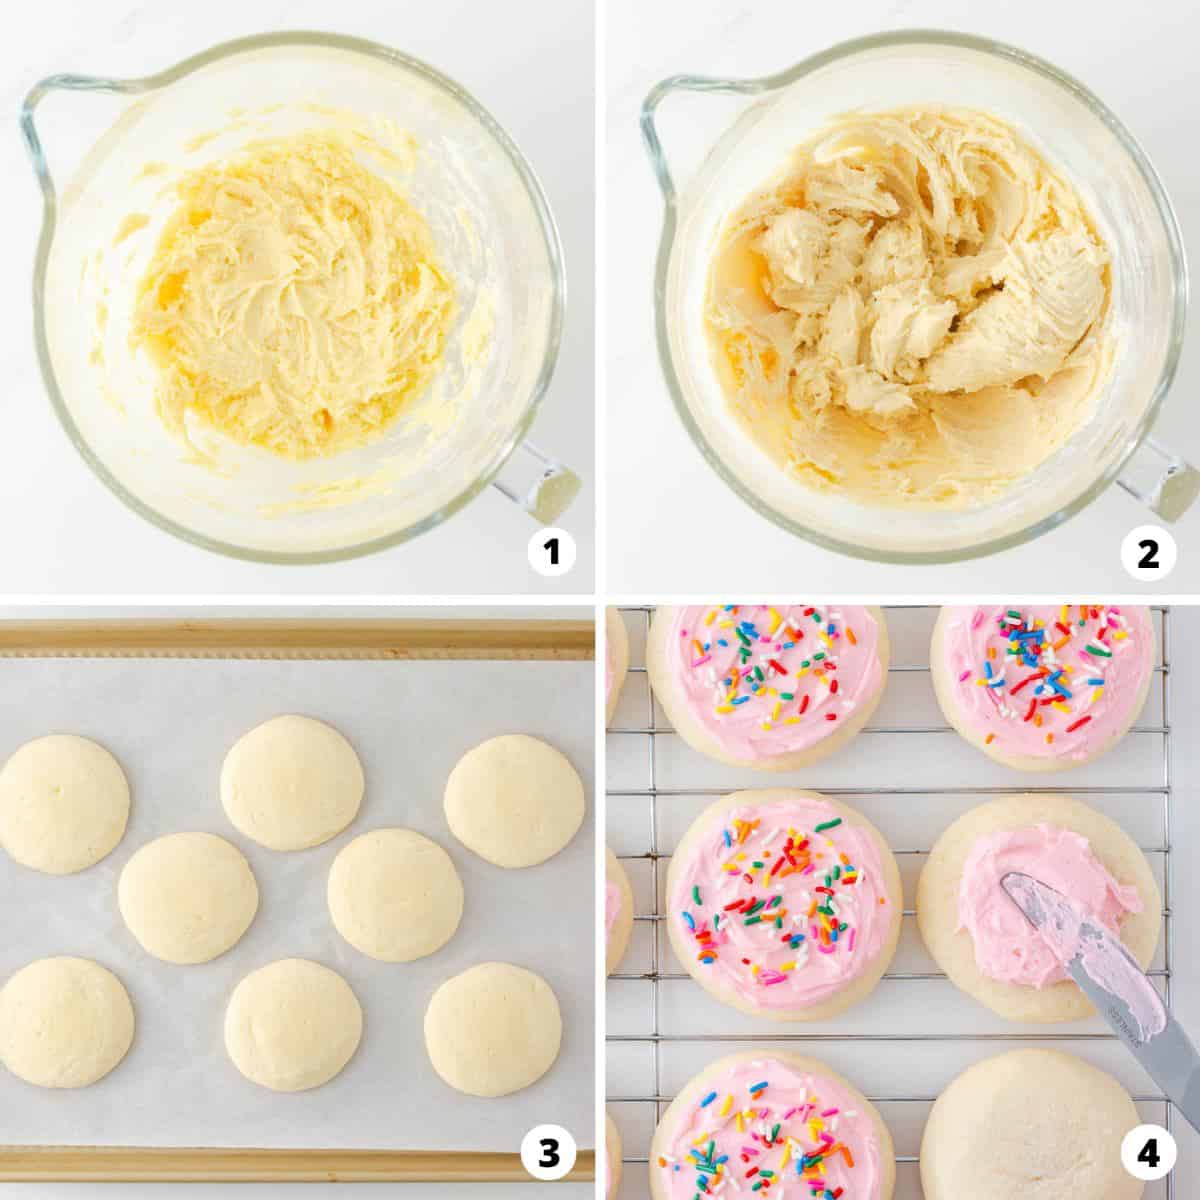 Showing how to make lofthouse cookies in a 4 step collage.